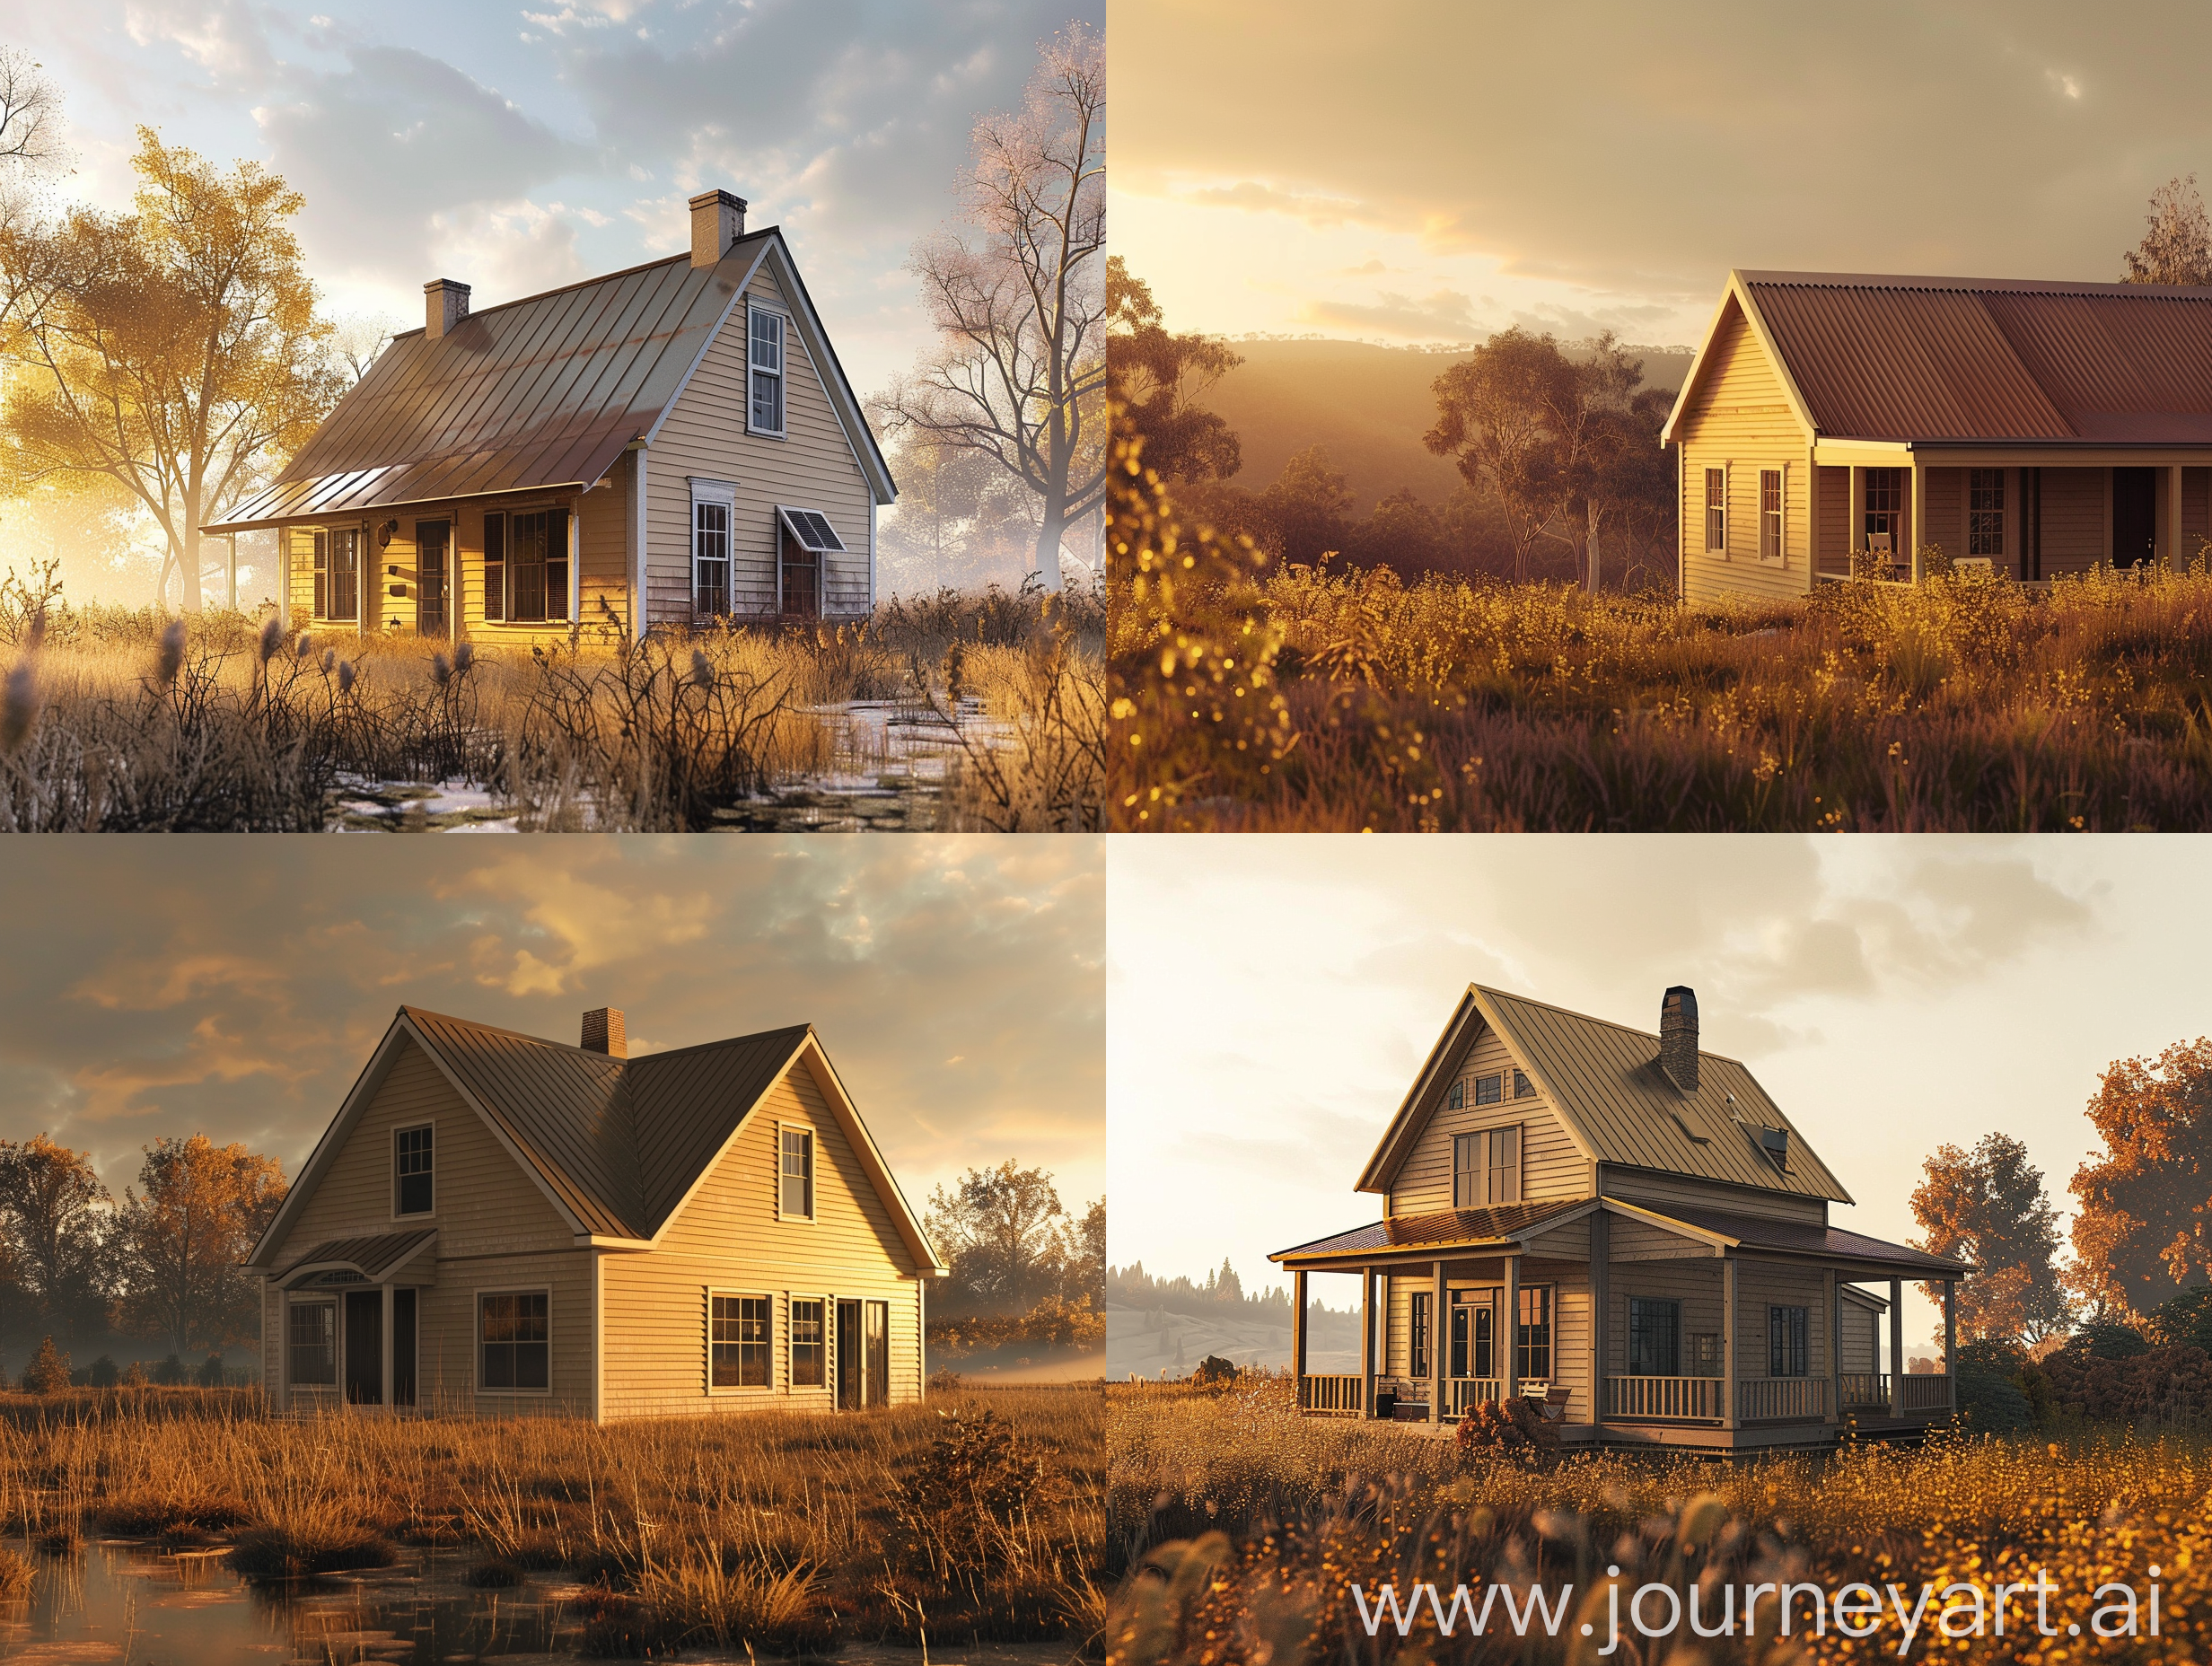 generate a photorealistic render of a colonial style house located in a bushfeld scene. The house must be single story with a pitched standing seam roof. IT must be taken on an overcast day during the golden hour. Use gold and brown tones in the image
